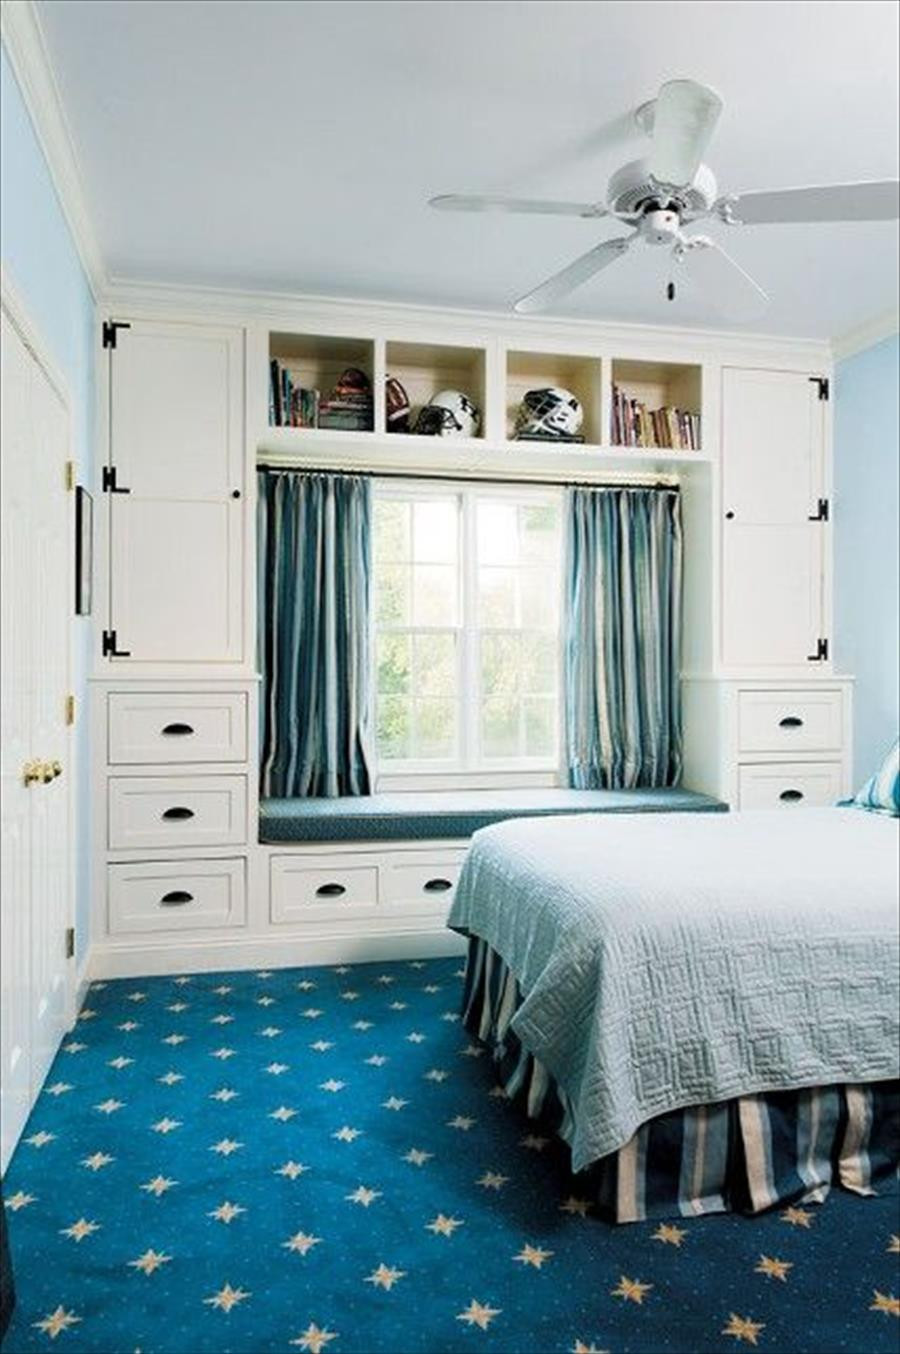 Storage For Small Bedroom
 31 Simple But Smart Bedroom Storage Ideas